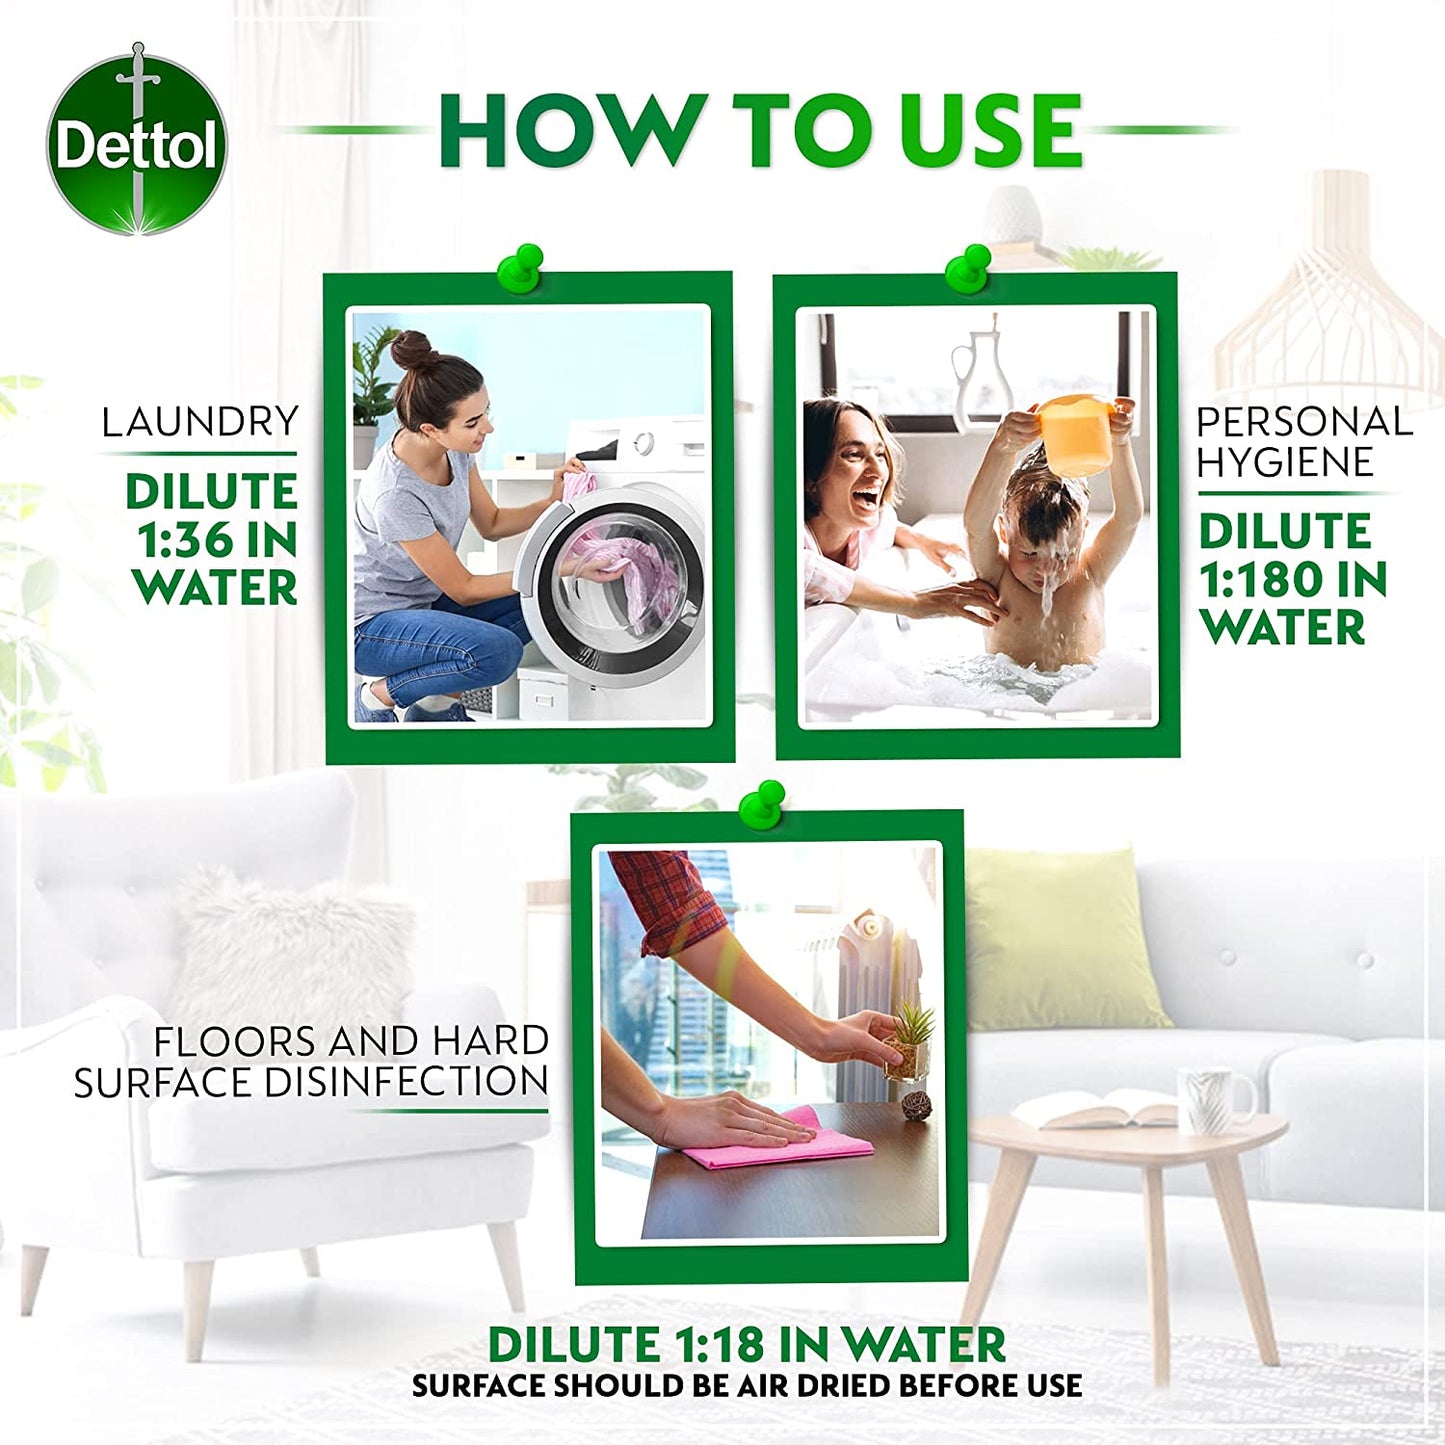 dettol-anticeptic-750mlDettol Antiseptic Antibacterial Disinfectant Liquid for Effective Germ Protection and Personal Hygiene, Used in Floor Cleaning, Bathing and Laundry, 750ml